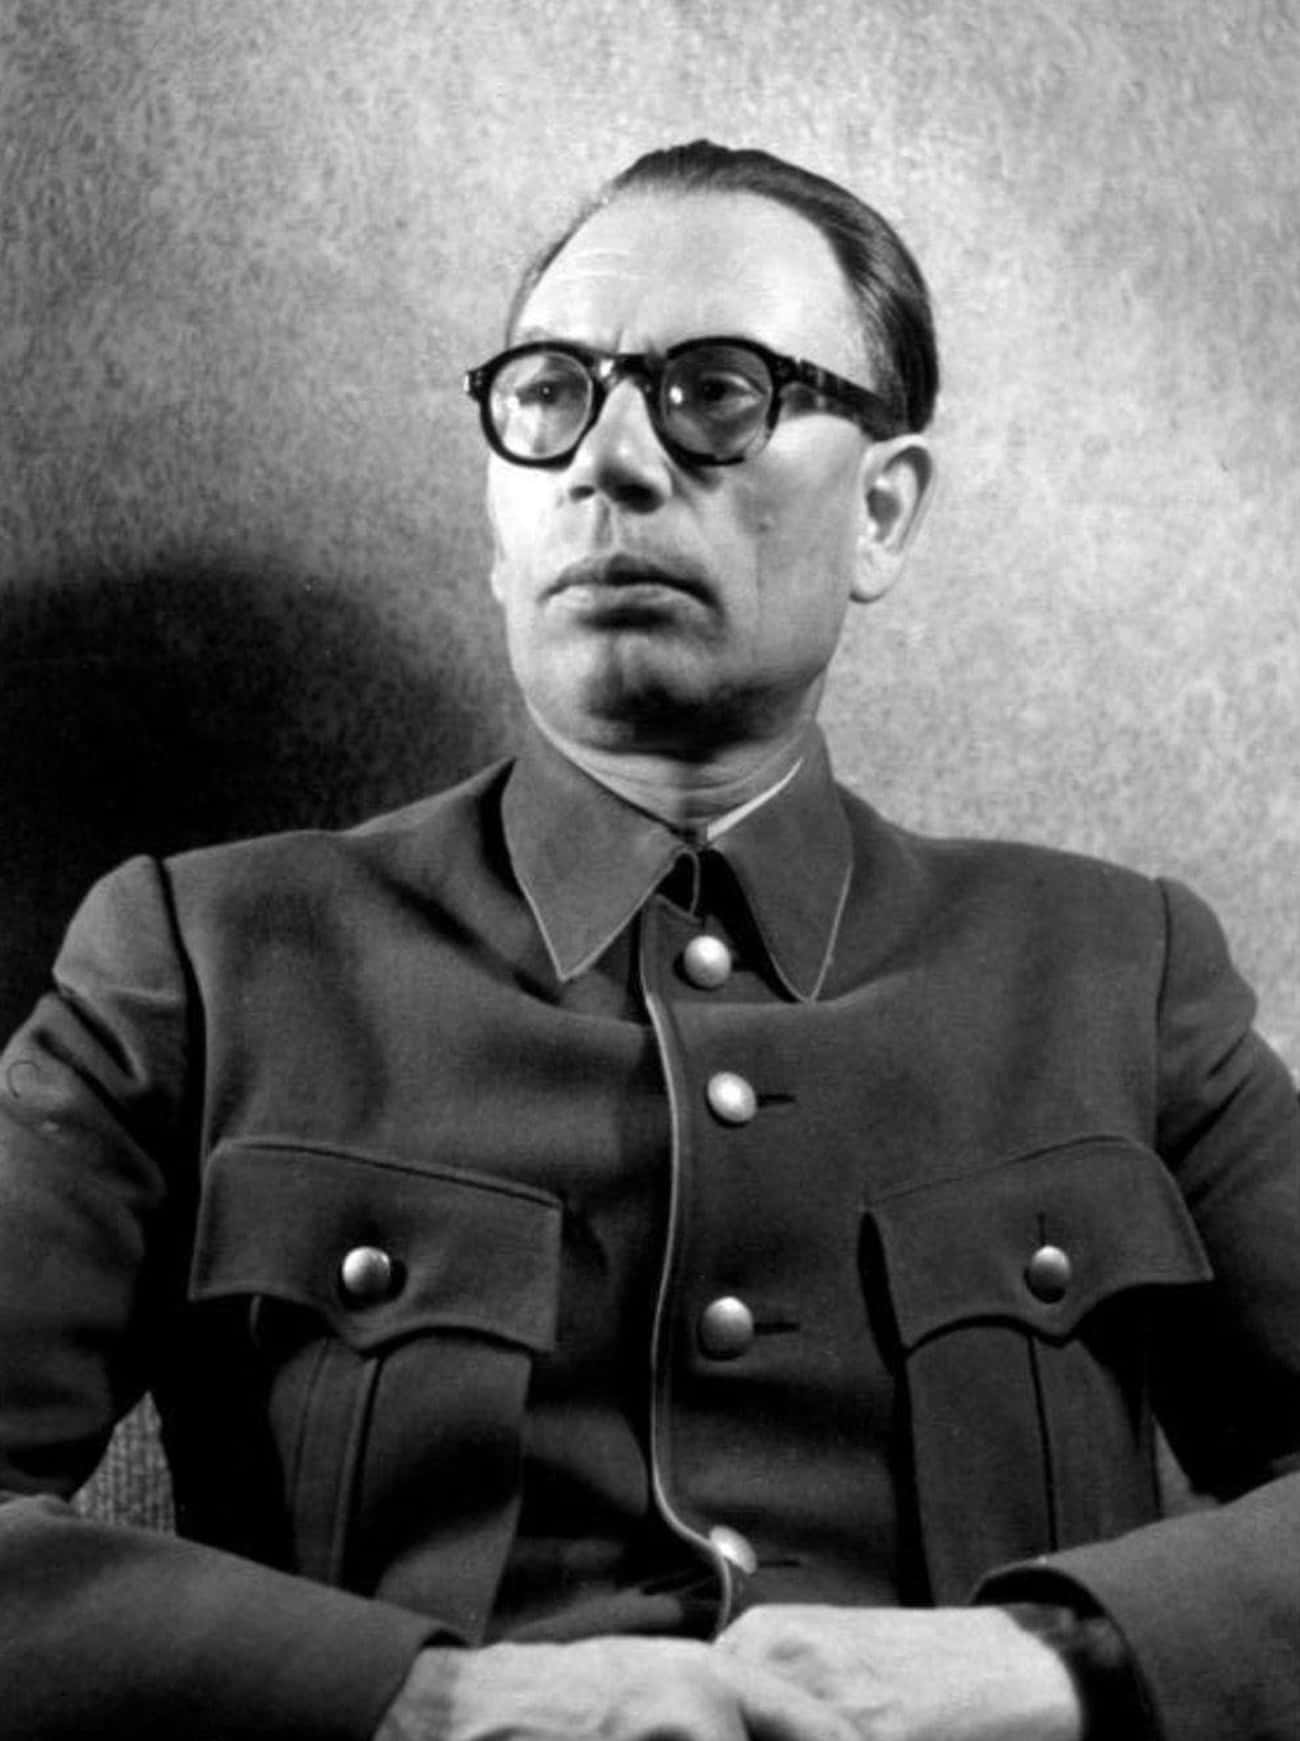 Soviet General Andrey Vlasov Defected To The Nazis And Led The Russian Liberation Army